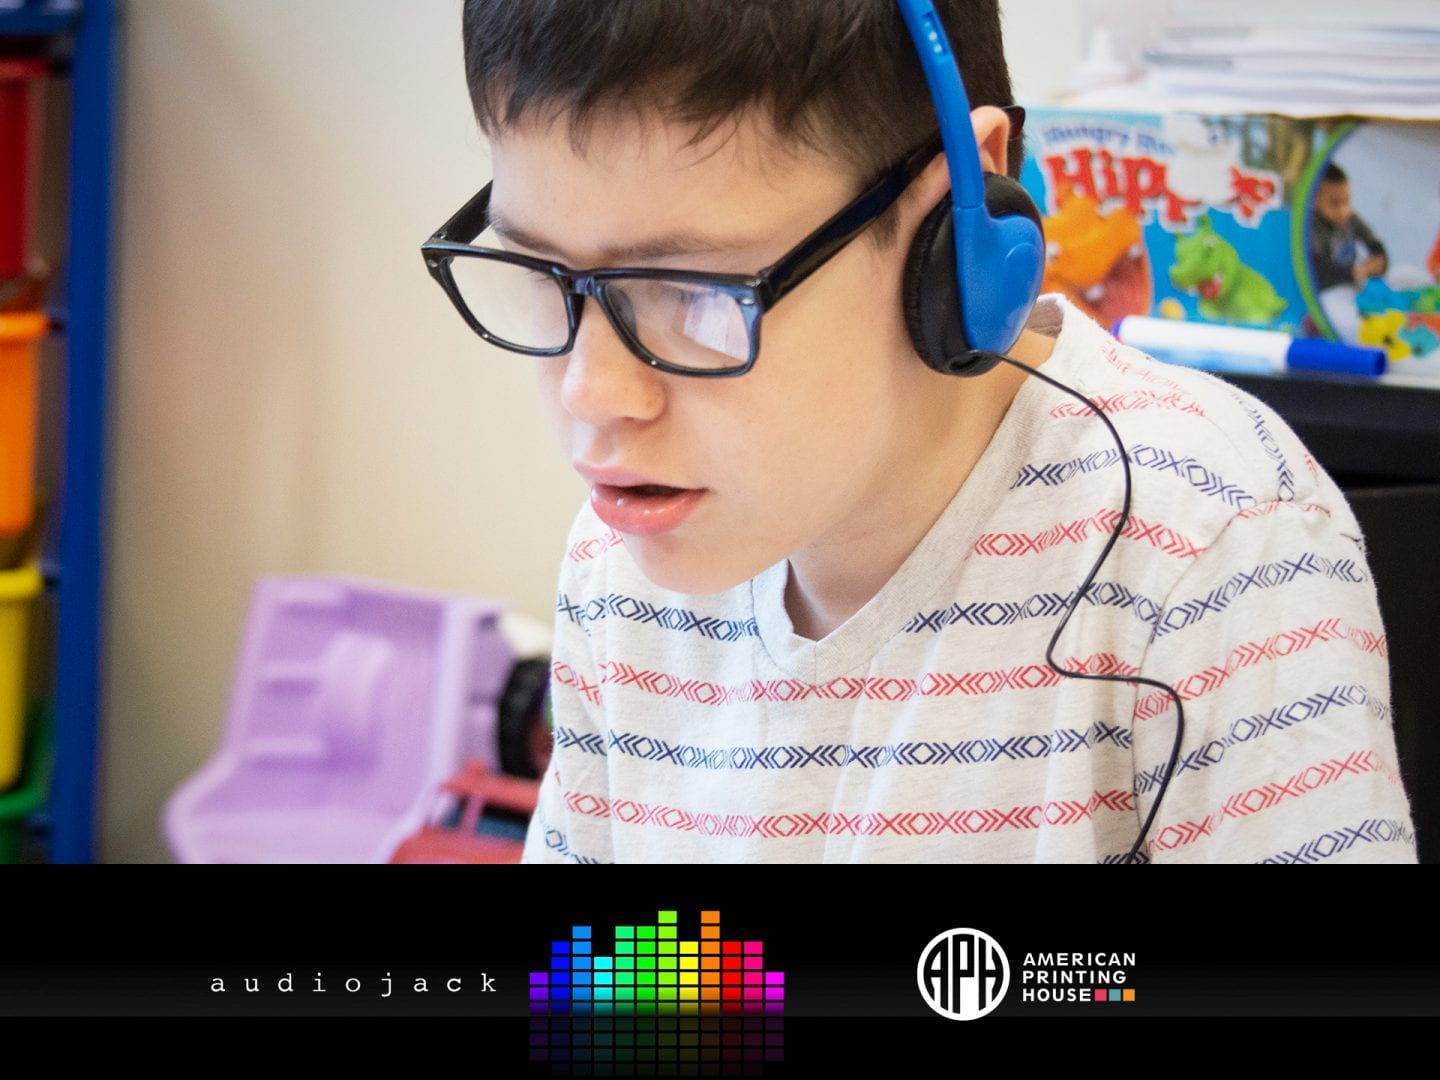 The Audiojack logo and APH logo beneath a photo of a boy engaged in listening to headphones